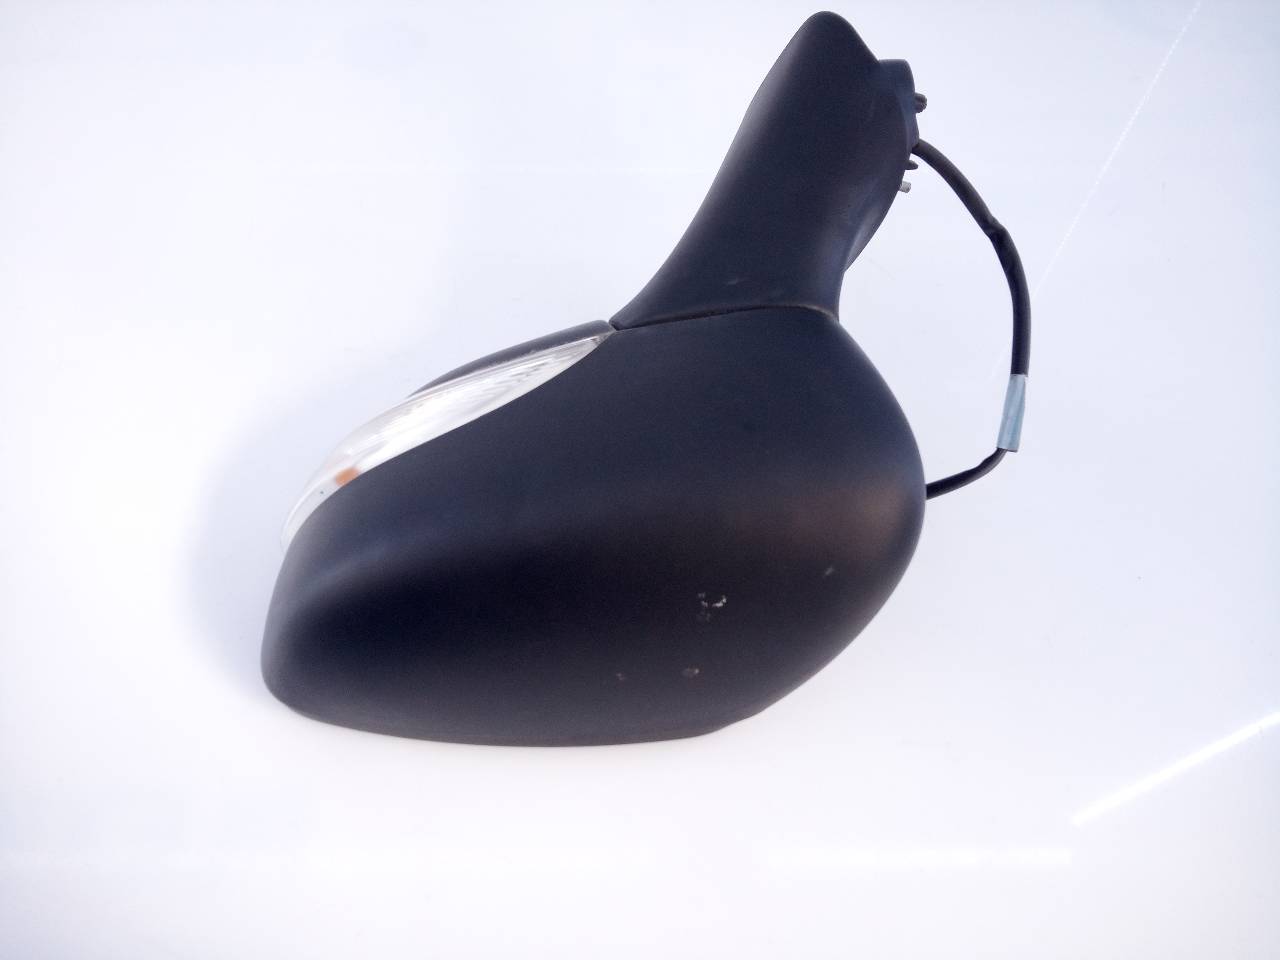 RENAULT Clio 3 generation (2005-2012) Left Side Wing Mirror 963025724R, E1-A1-15-1 18632243